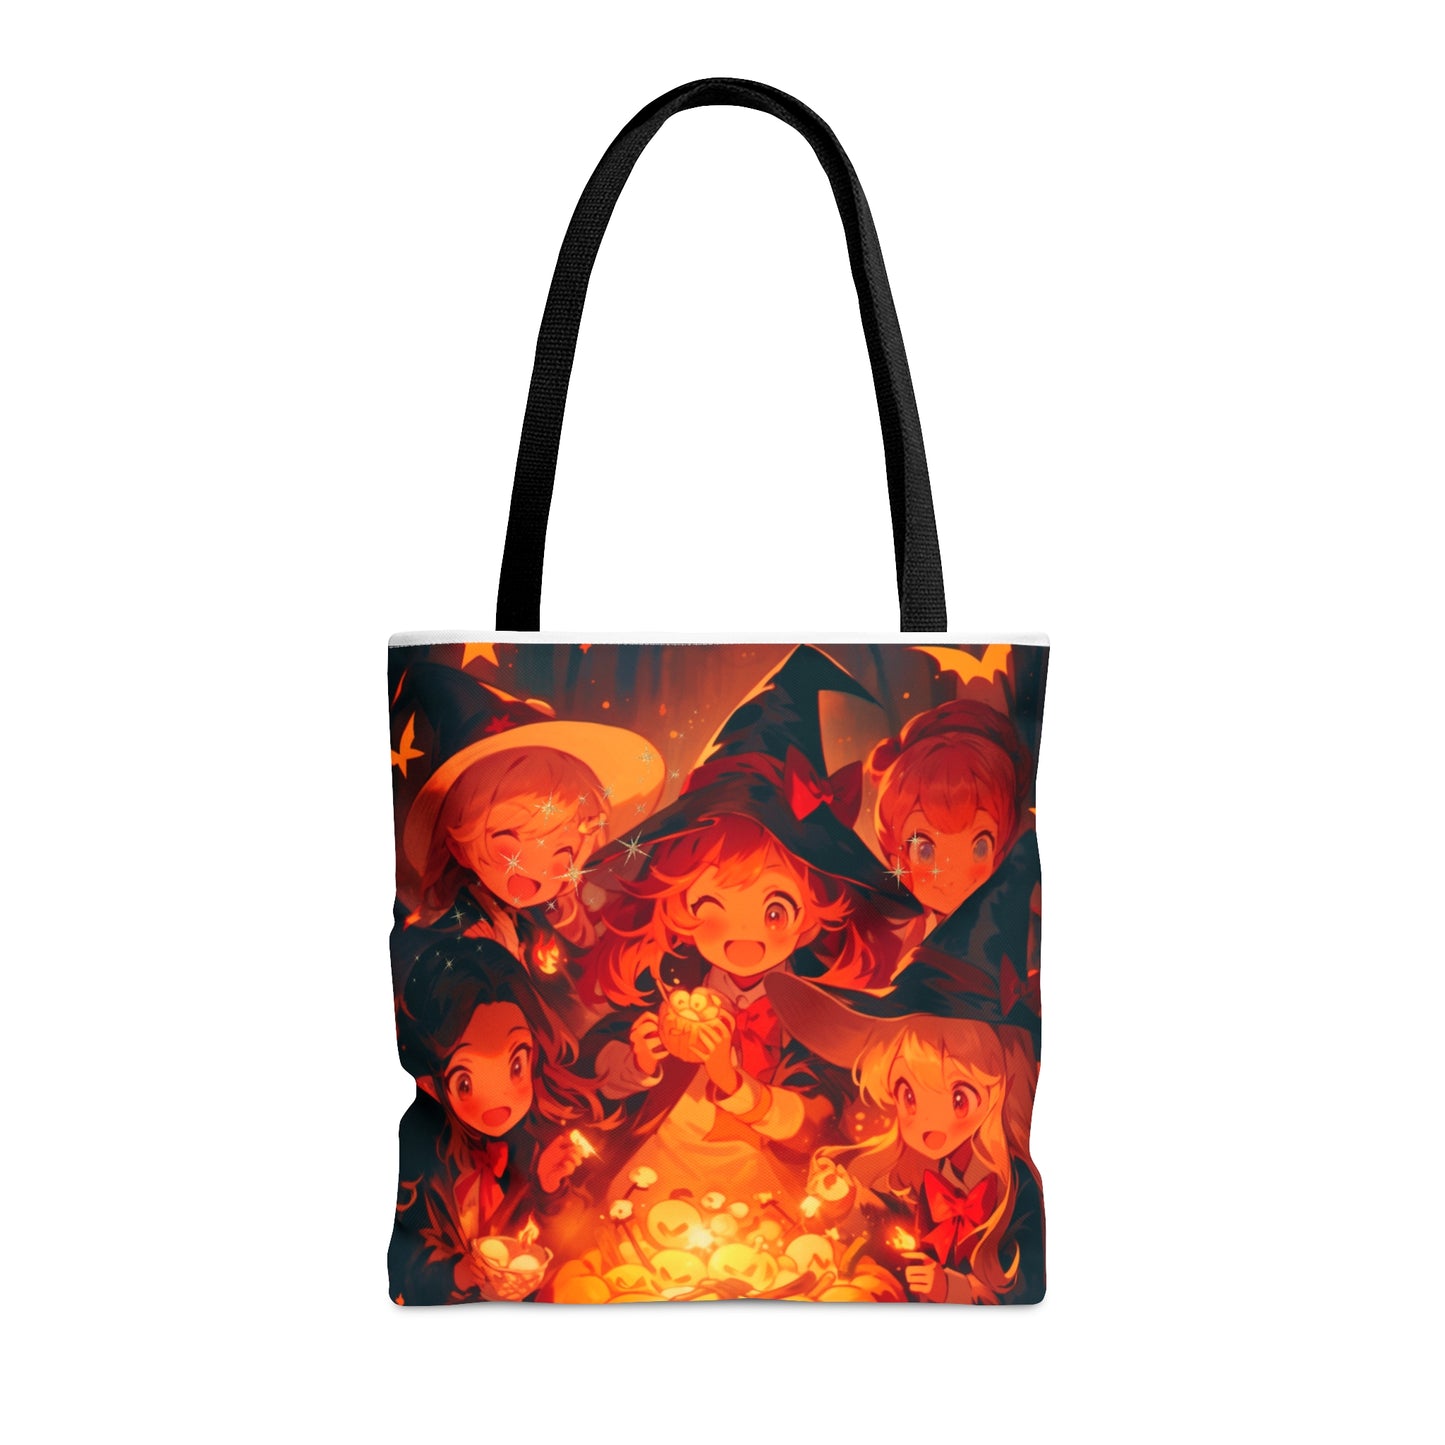 Young Witches with pumpkins | Original Art |Tote Bag | All over print, 2 sided